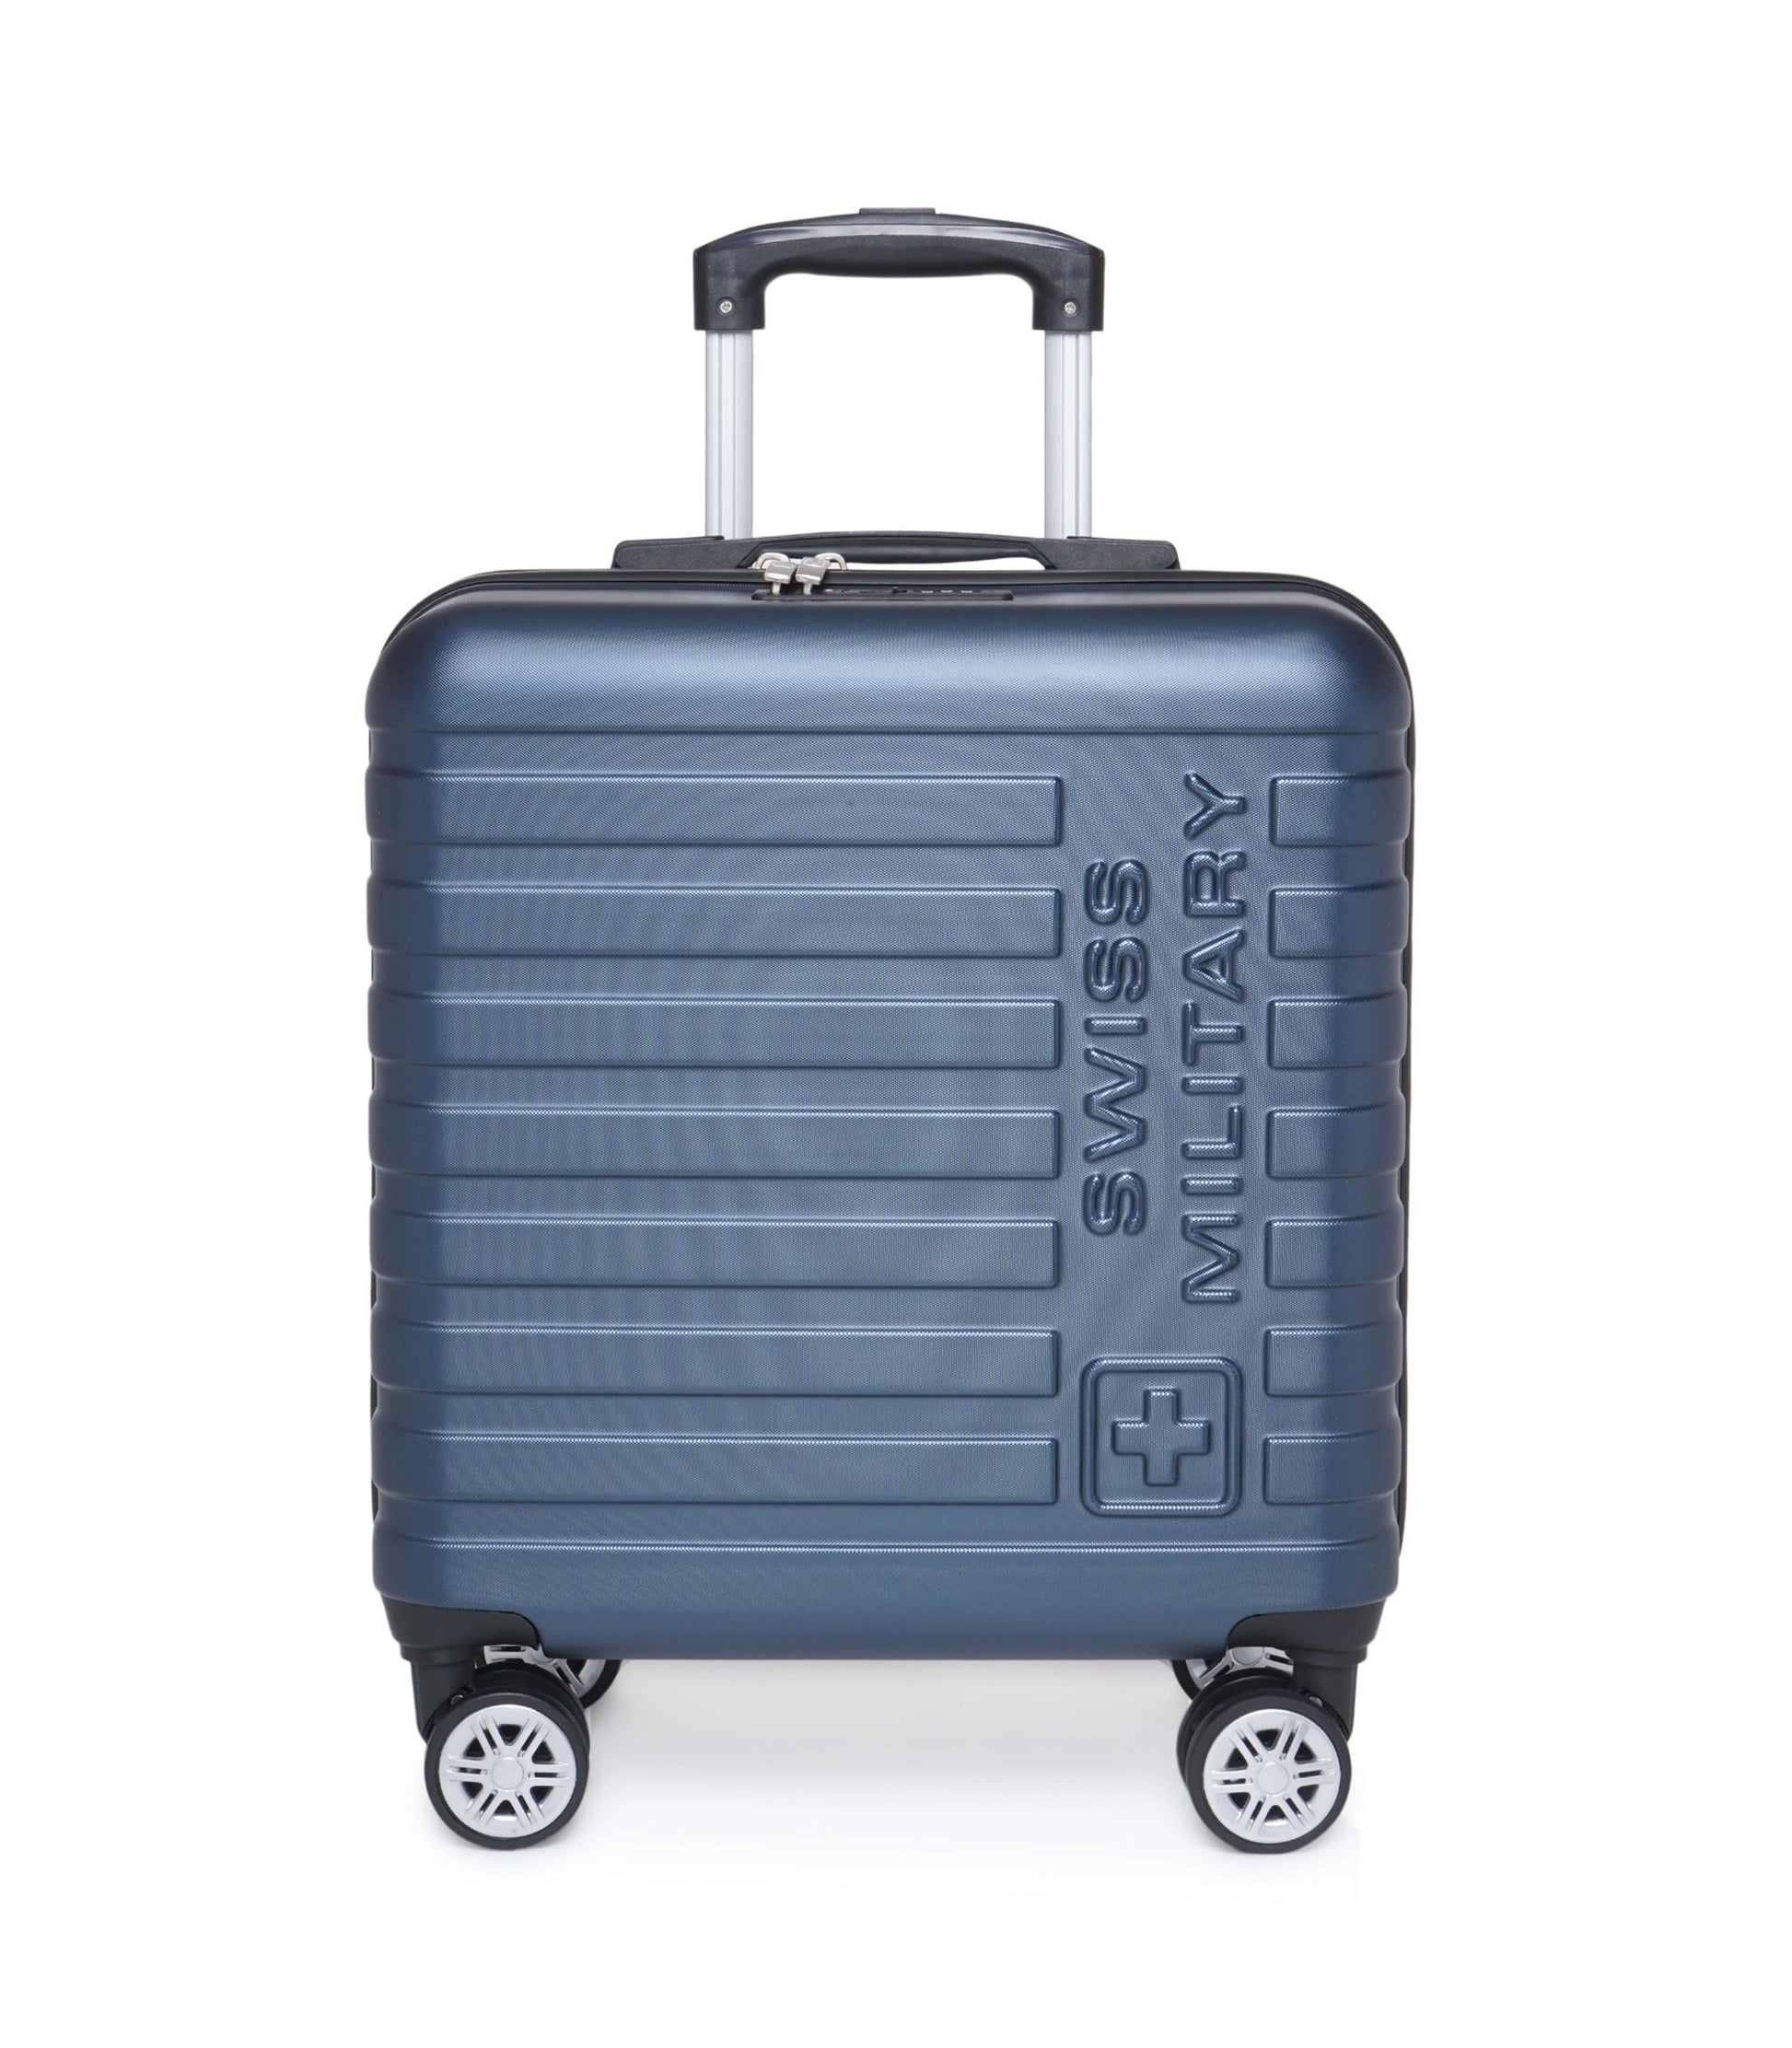  travel game with our Dapper Hard Trolley Overnighter With 8 wheels for smooth maneuvering 